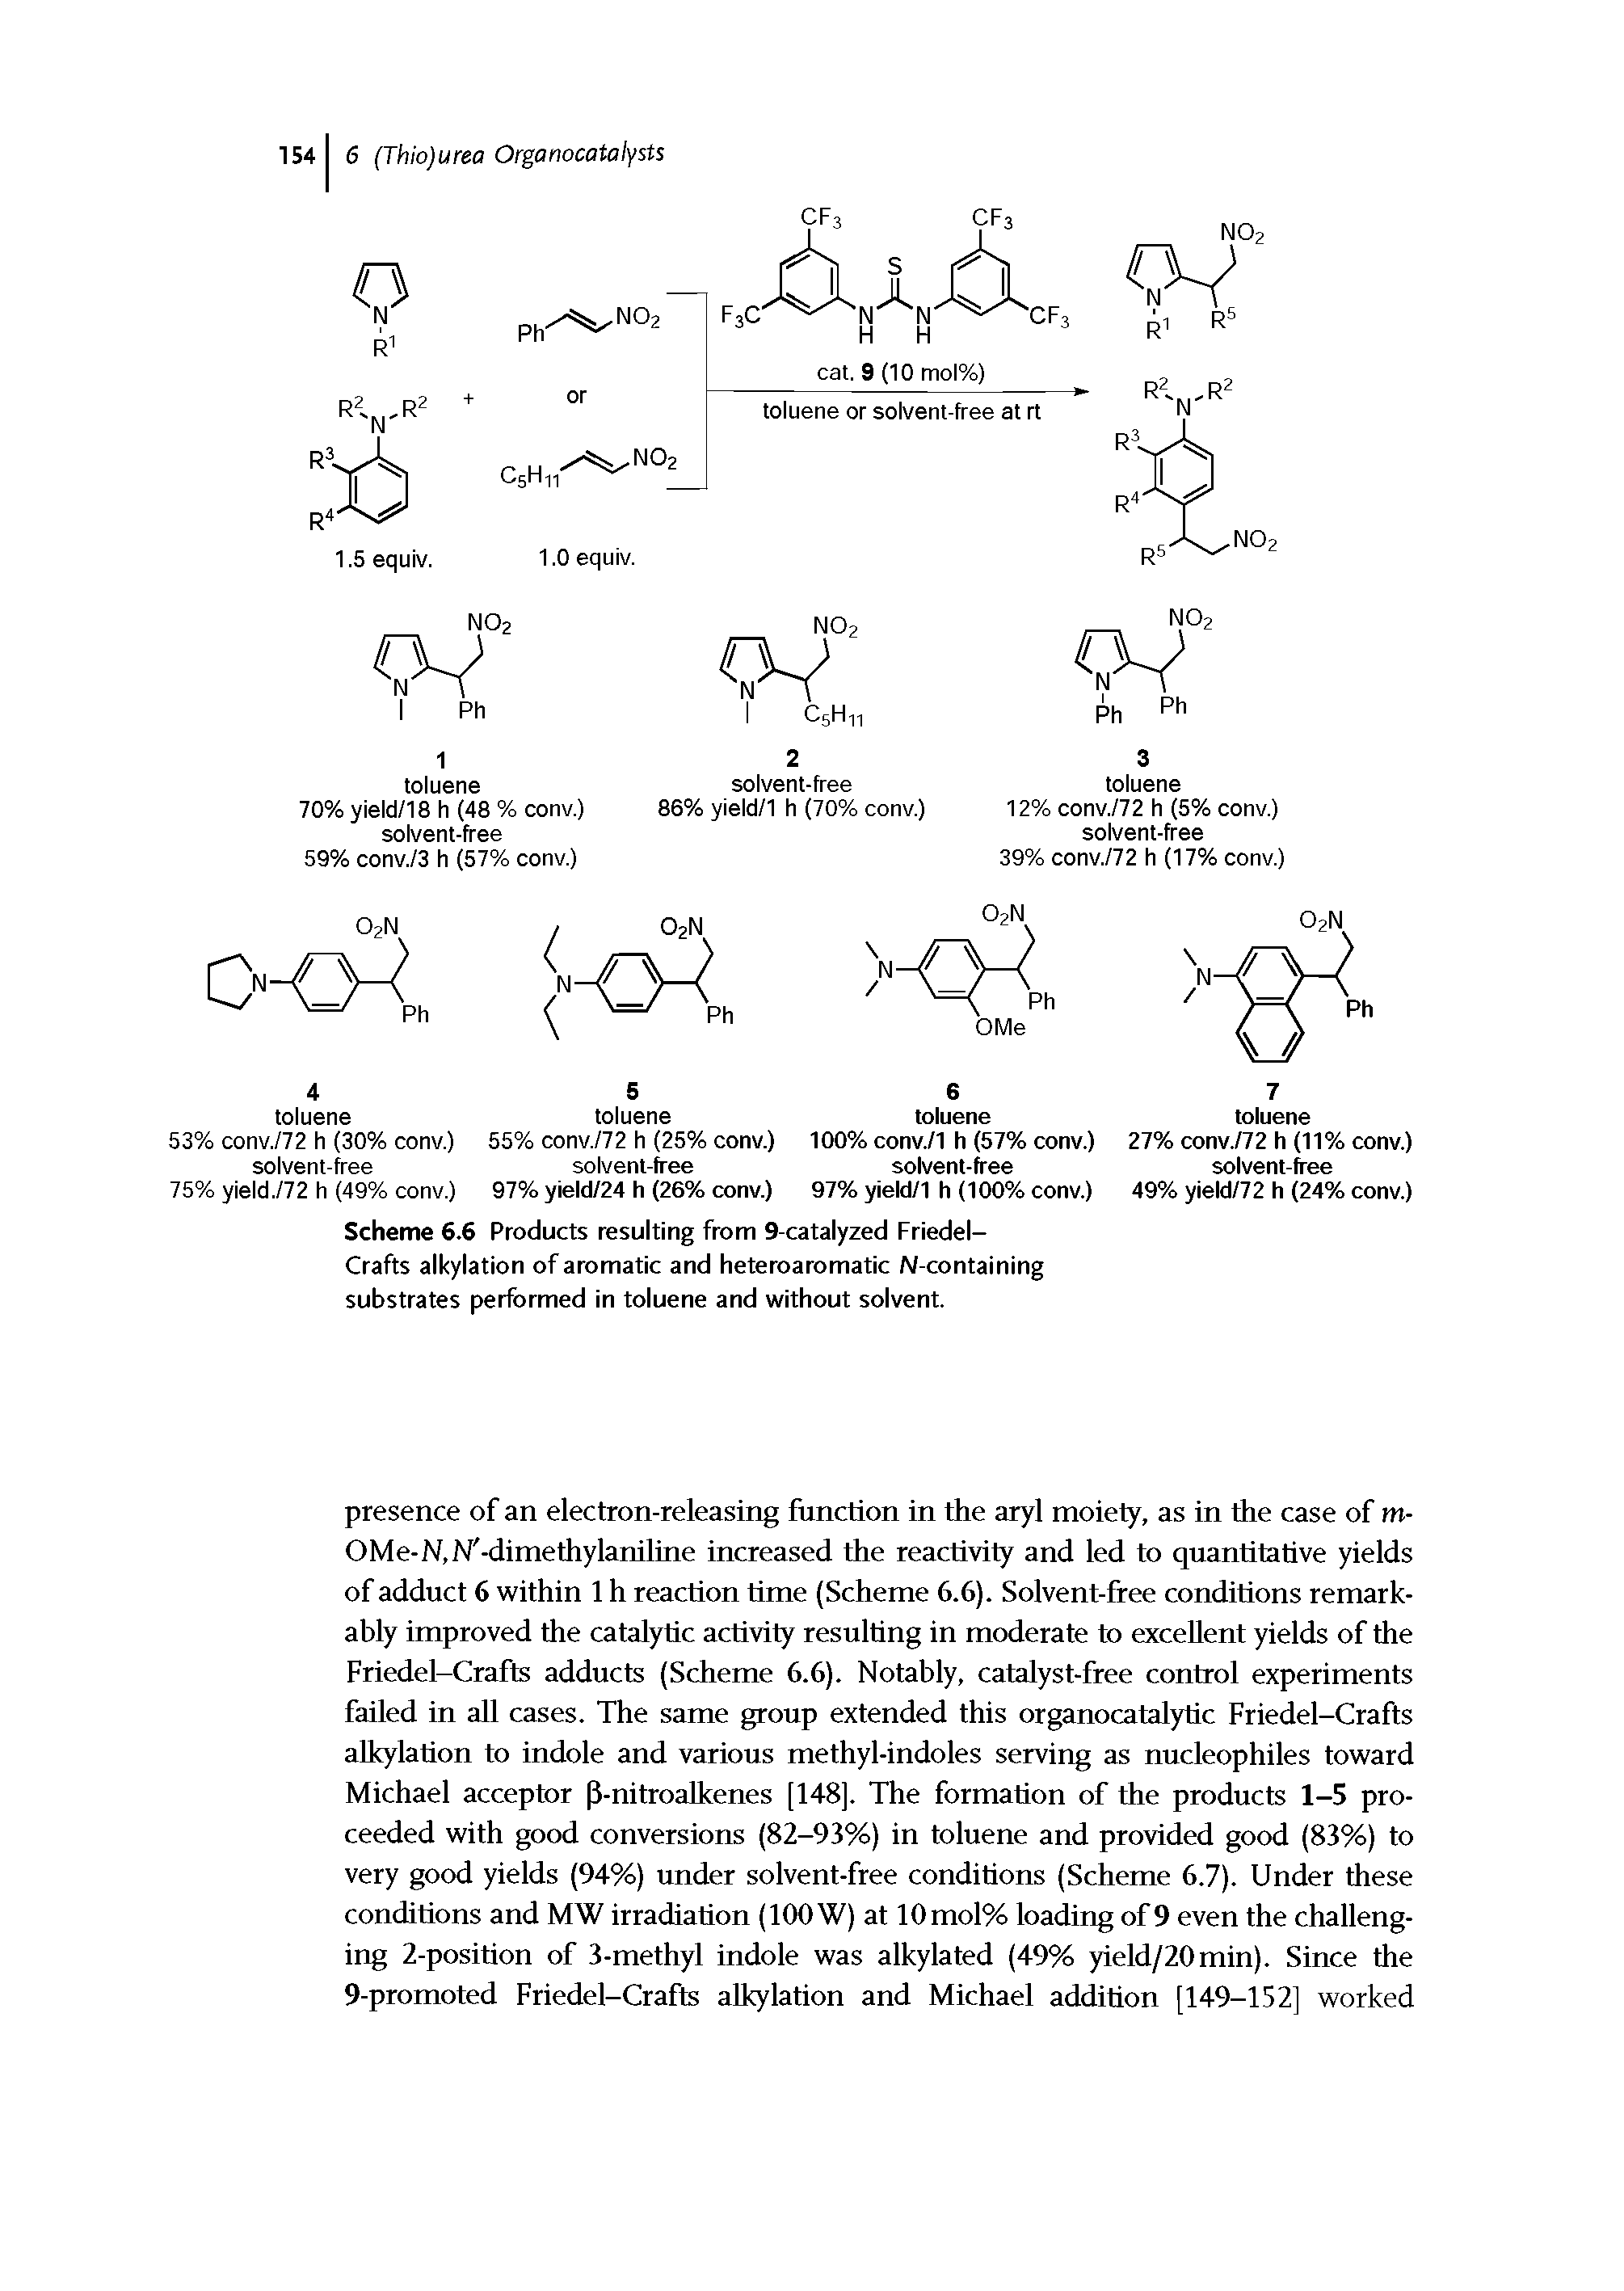 Scheme 6.6 Products resulting from 9-catalyzed Friedel-Crafts alkylation of aromatic and heteroaromatic N-containing substrates performed in toluene and without solvent.